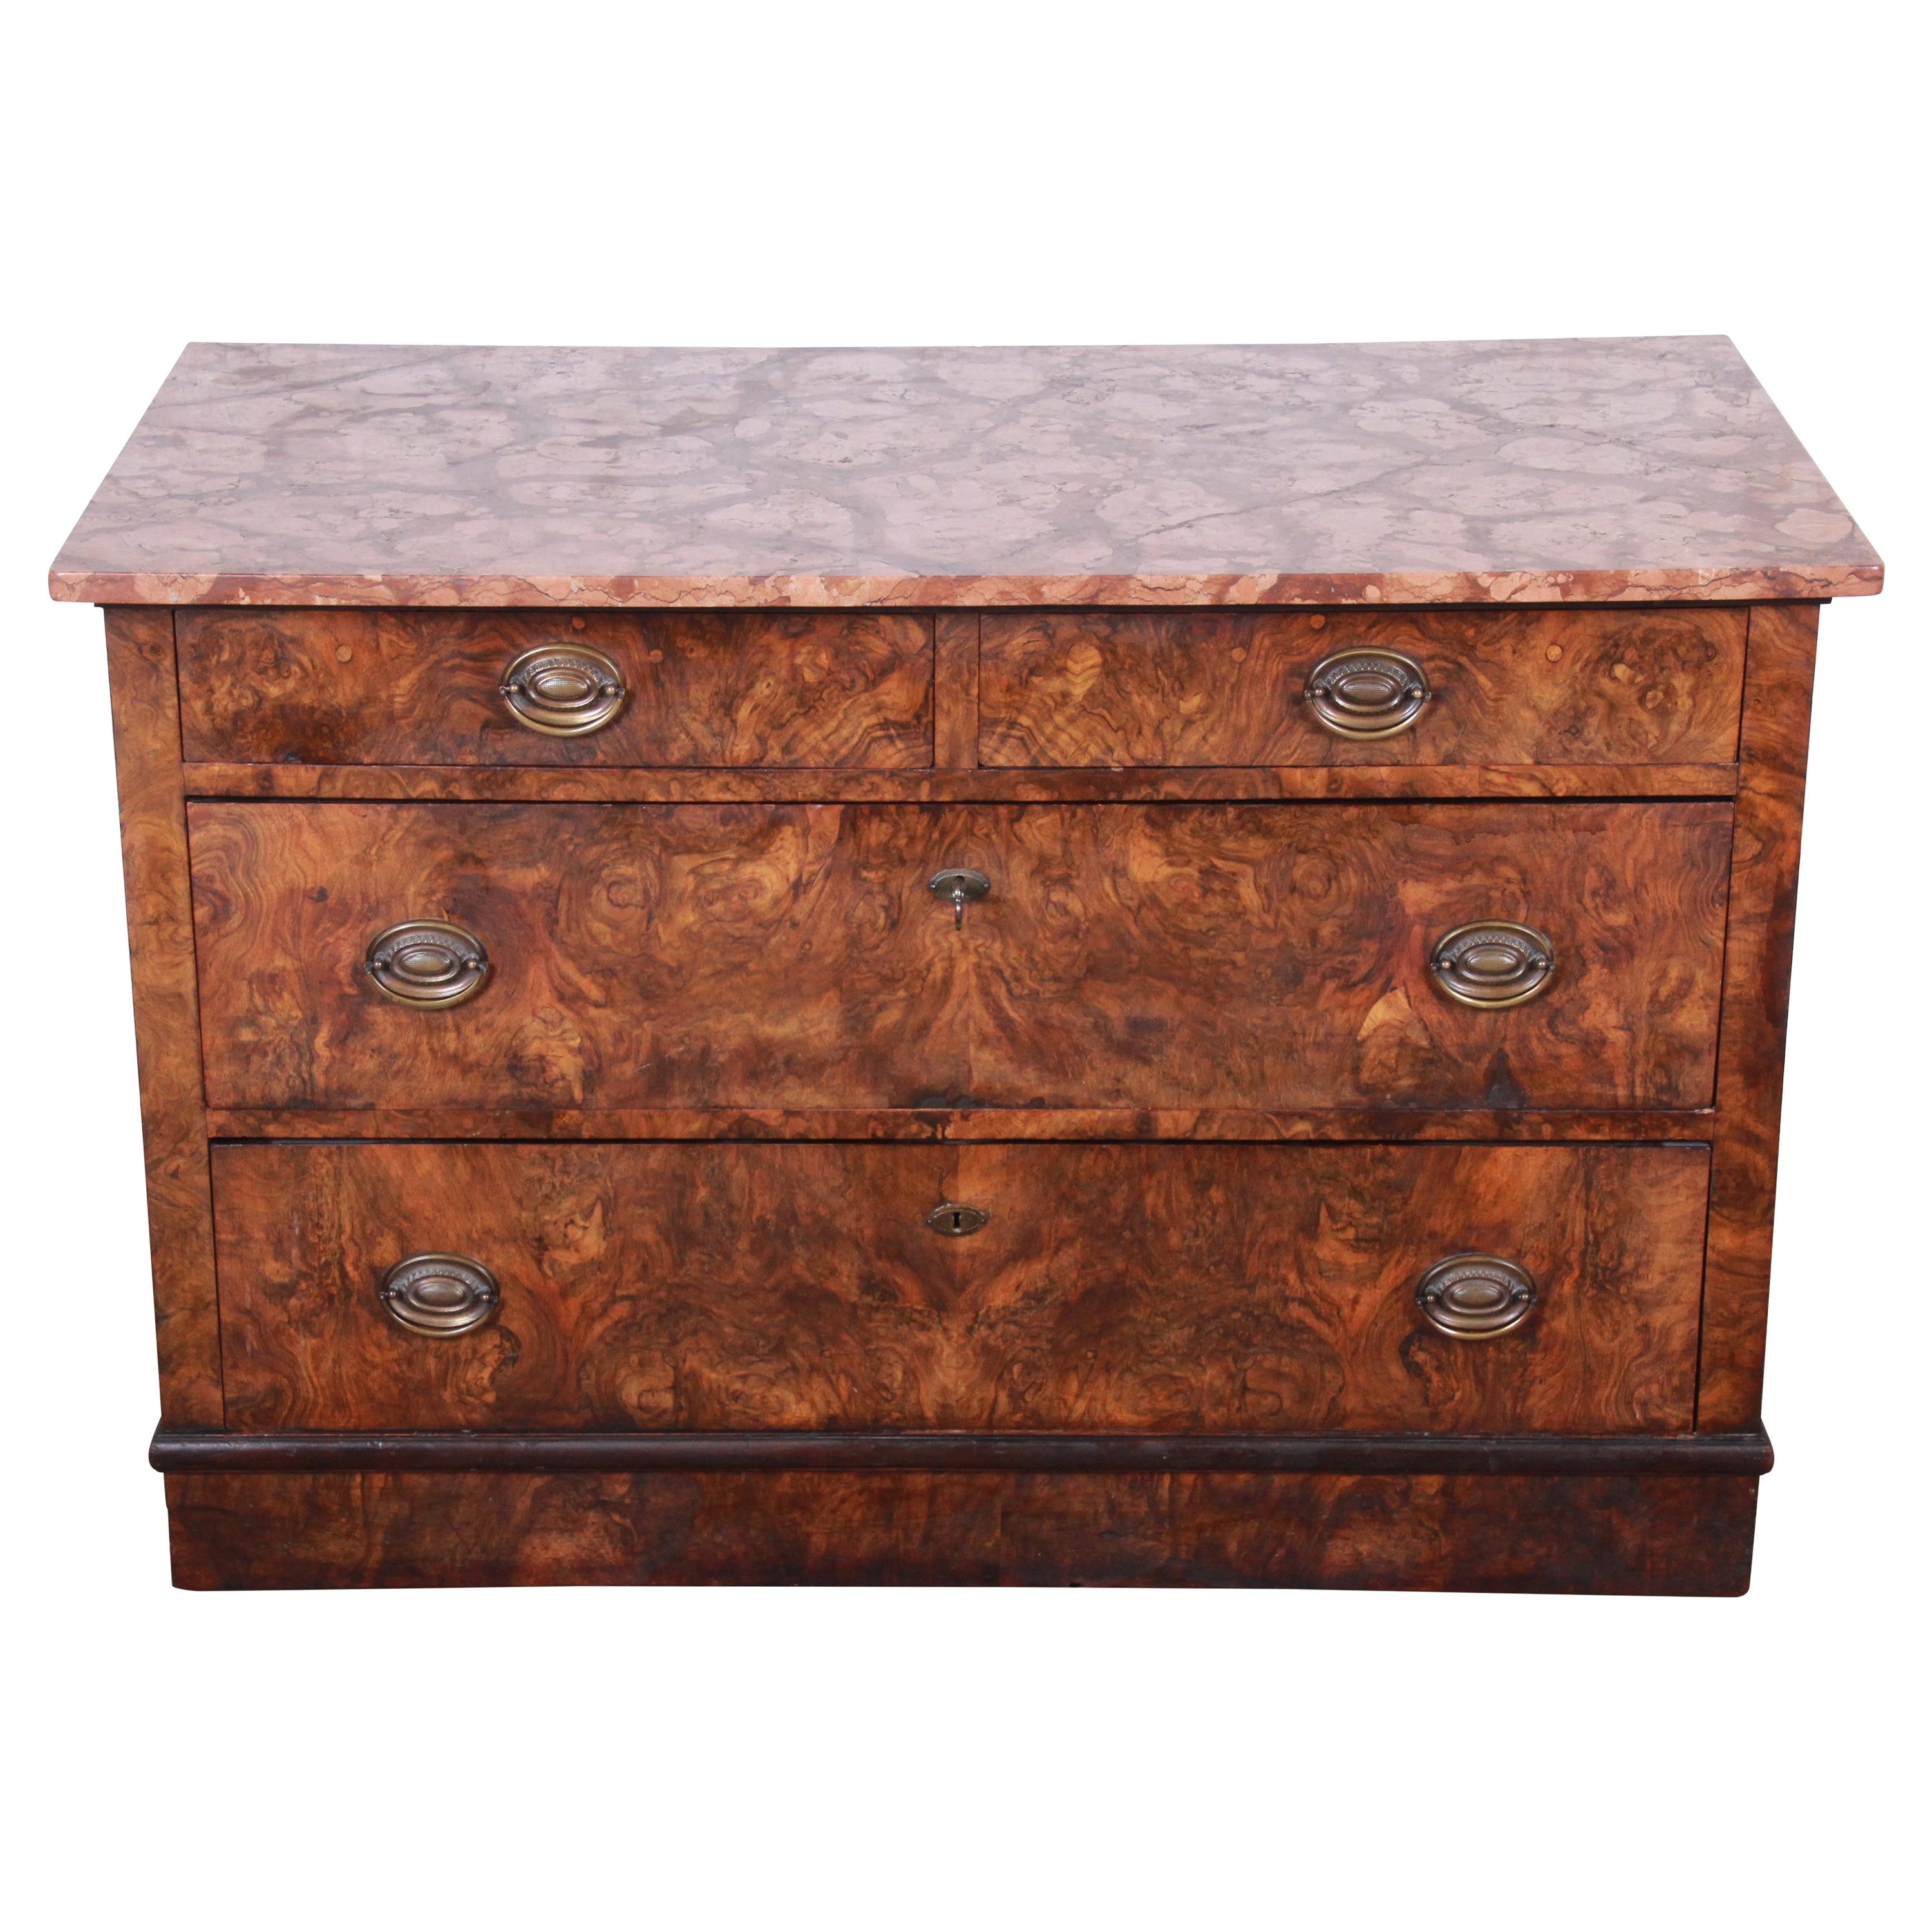 19th Century Burled Walnut Marble Top Commode or Chest of Drawers